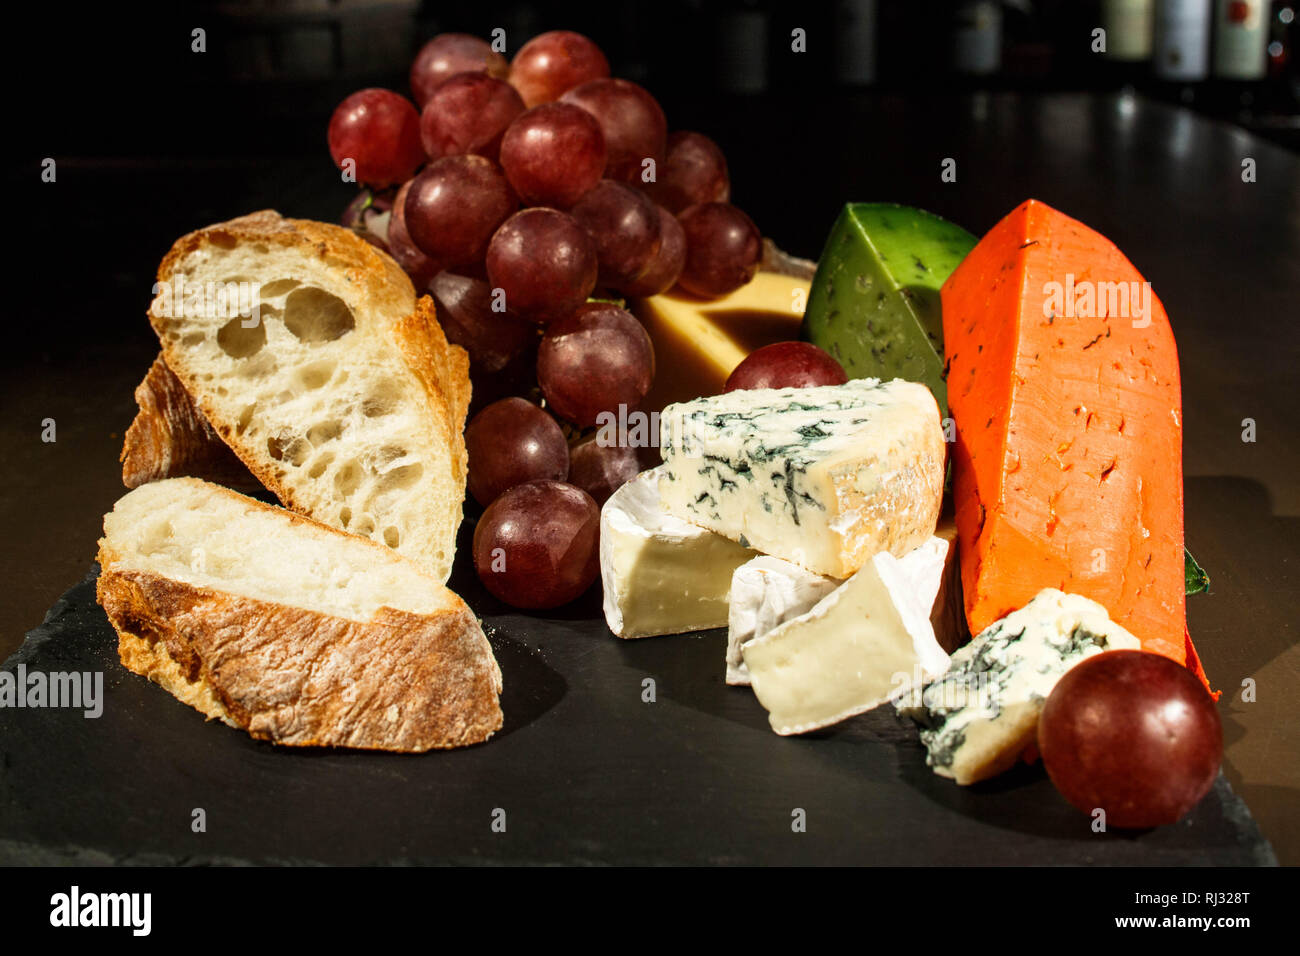 Pieces of cheese and bread on black dish Stock Photo